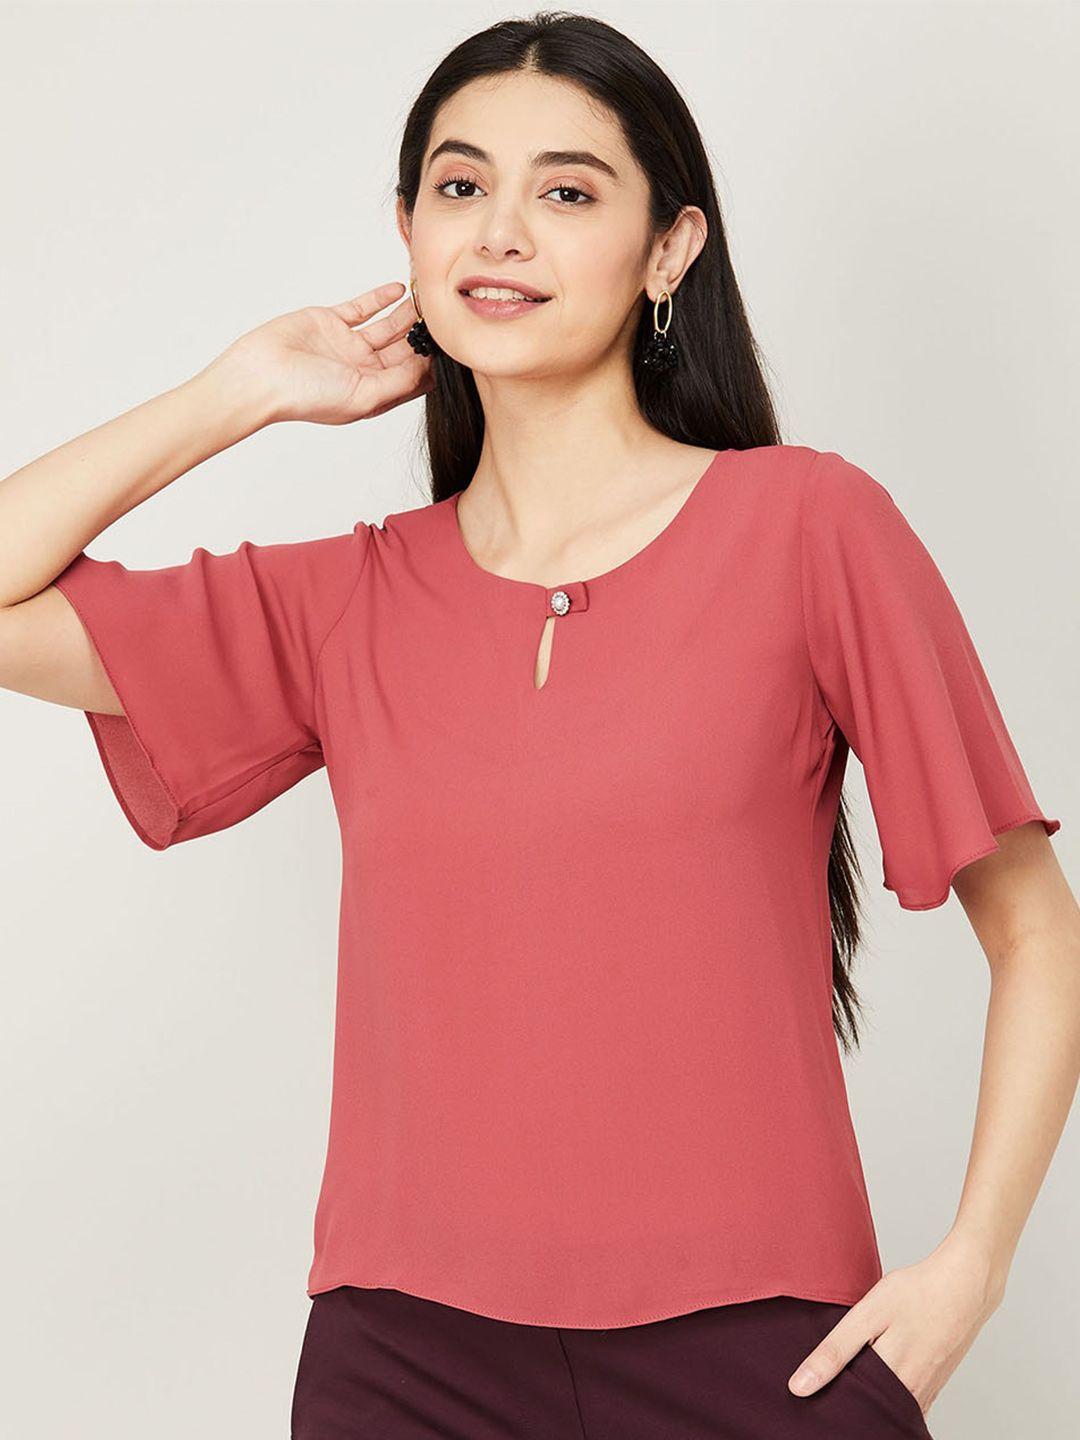 code by lifestyle brown keyhole neck top